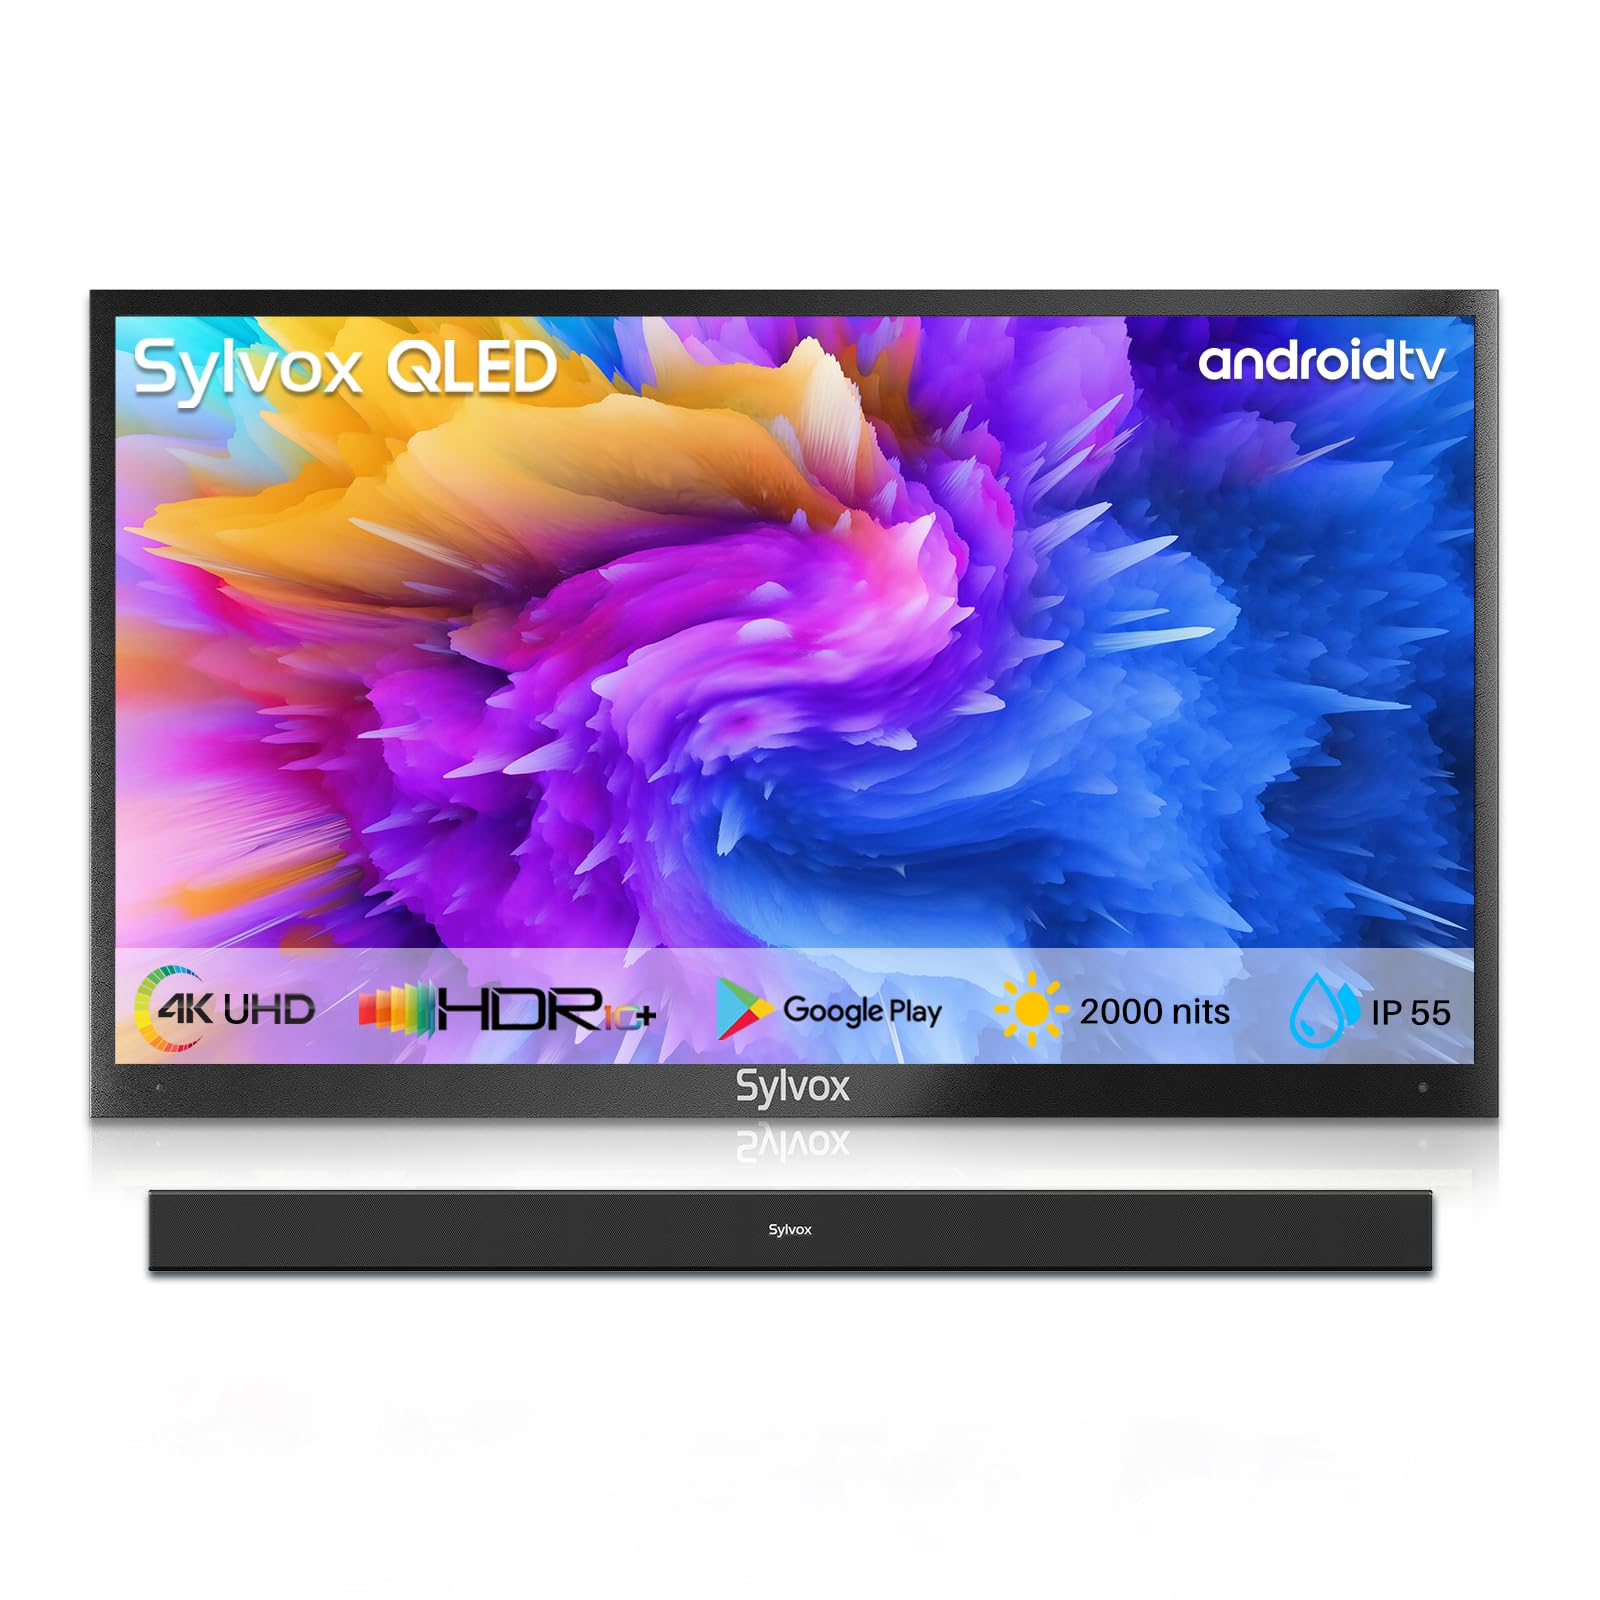 SYLVOX Outdoor TV with Soundbar, 4K QLED Outdoor TV 43" 2000 Nits Full Sun, Outdoor Smart Television with Voice Control & Chromecast Built-in, IP55 Weatherproof TV for Outside (Pool Pro QLED Series)